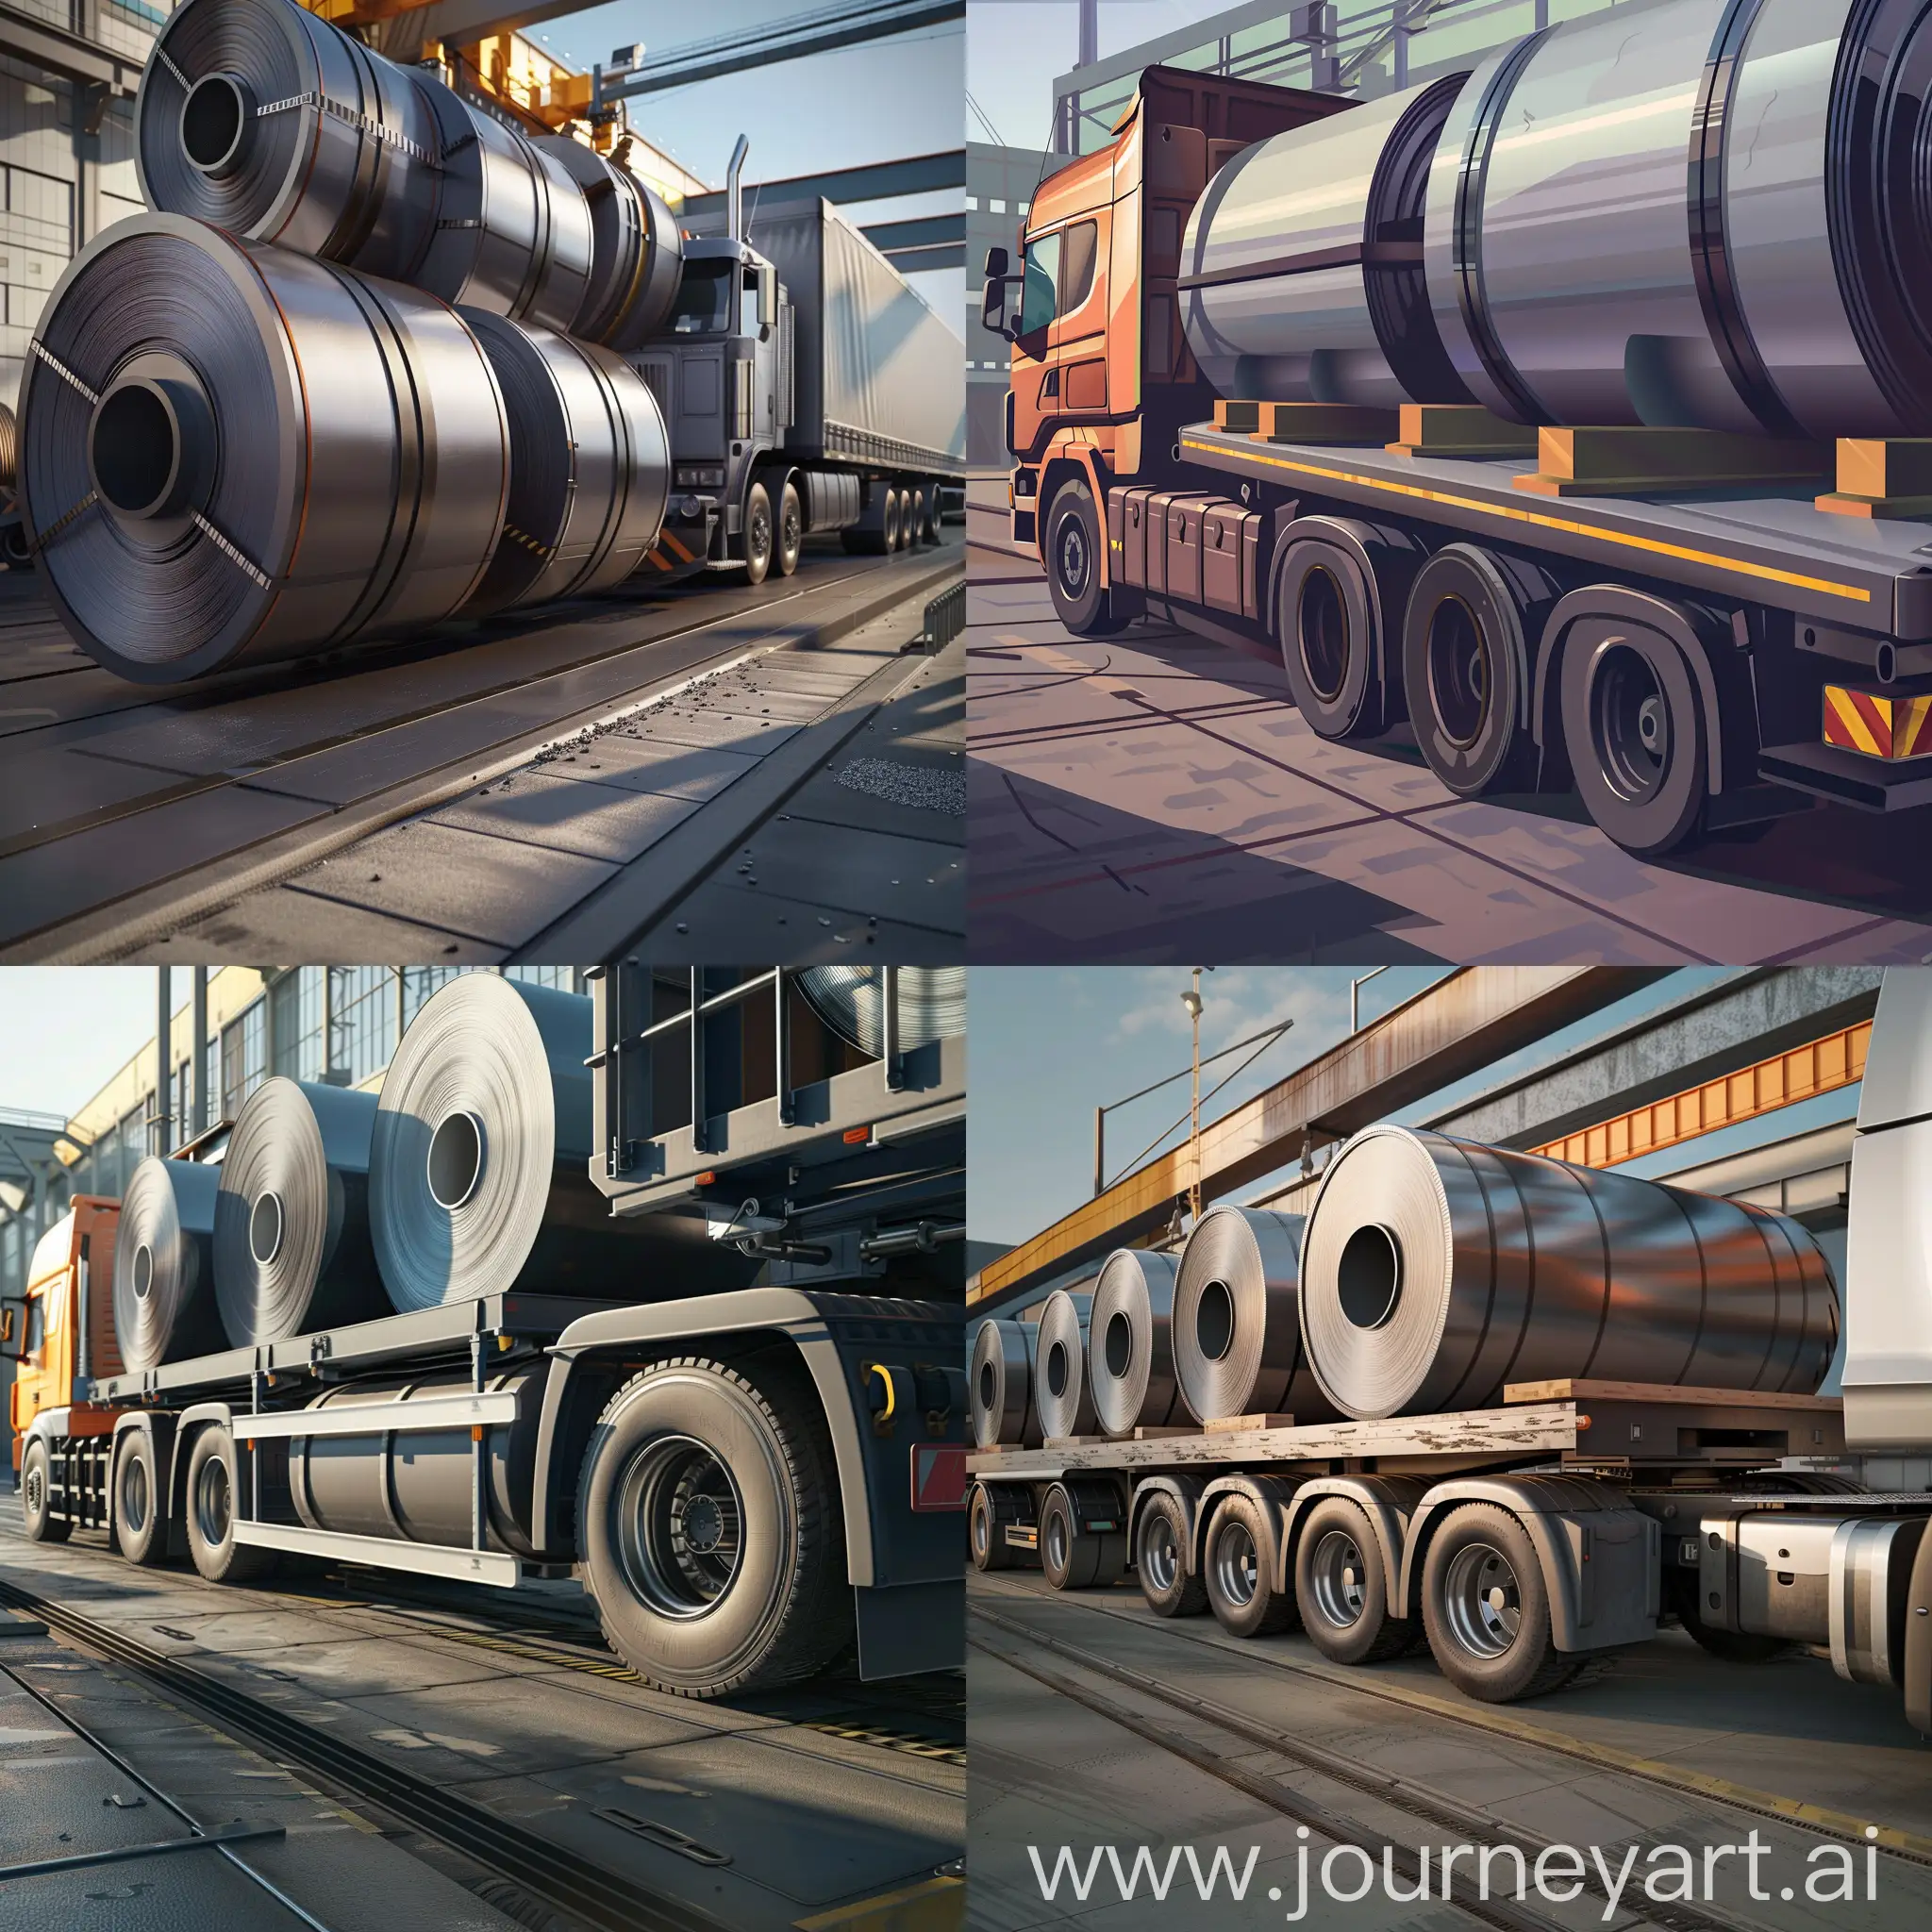 Create a realistic image of steel rolls loading onto a truck. The truck should be depicted with clean lines and high details , while the steel rolls should be accurately depicted with the right shade and texture. The scene should convey the industrial environment with a focus on performance and efficiency